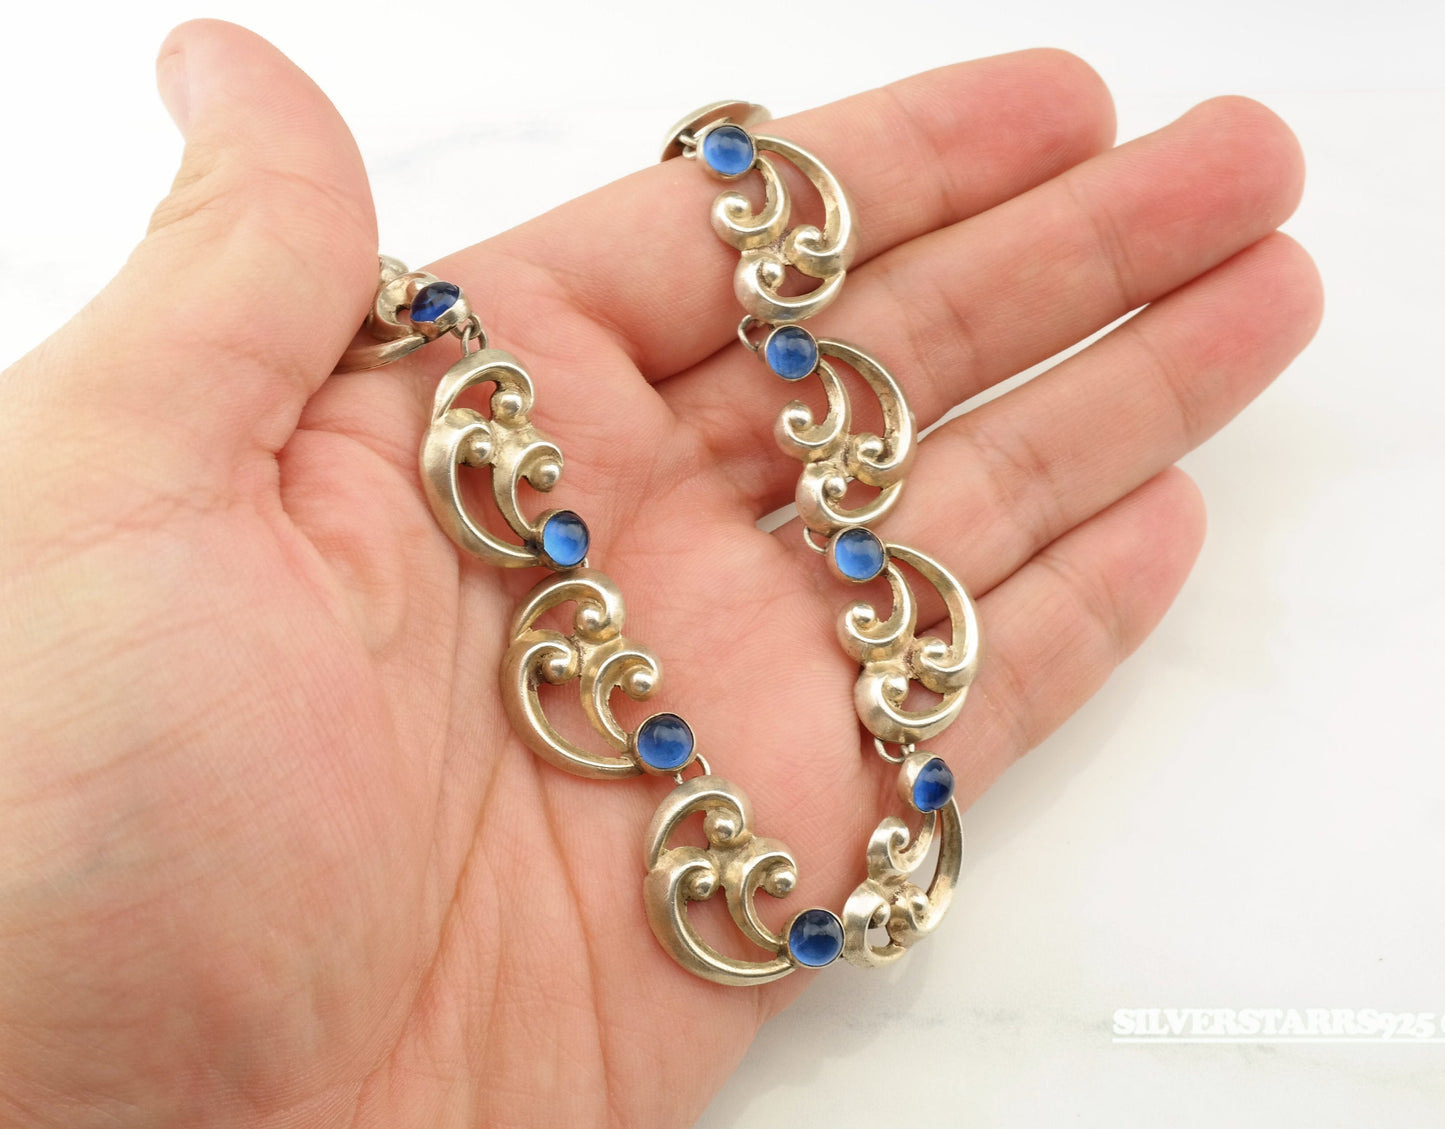 Vintage Abstract Sterling Silver Blue Paste Necklace